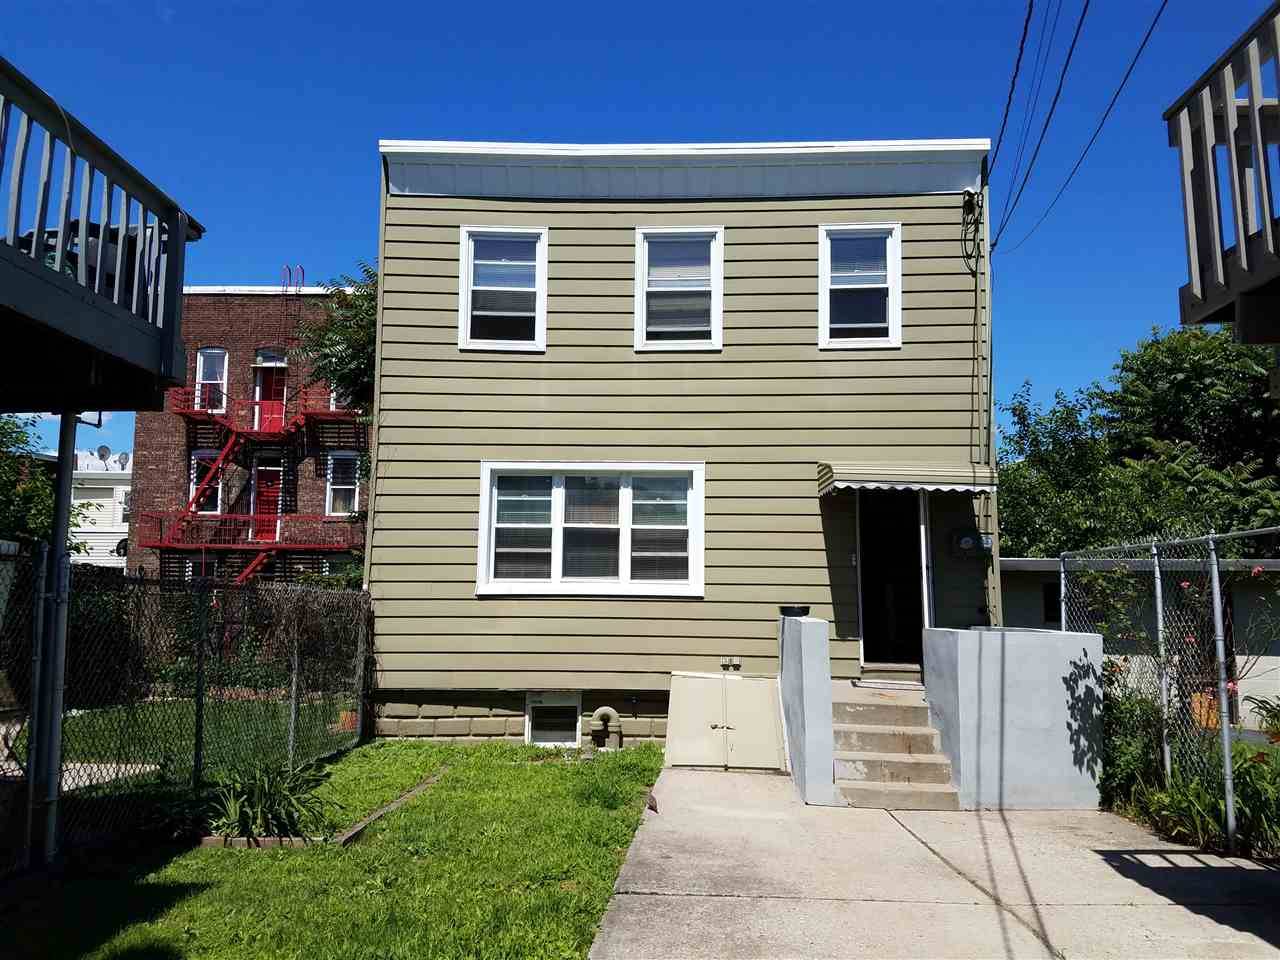 This cozy apartment located on the second floor of this two-family home in Journal Square comes with the utilities included